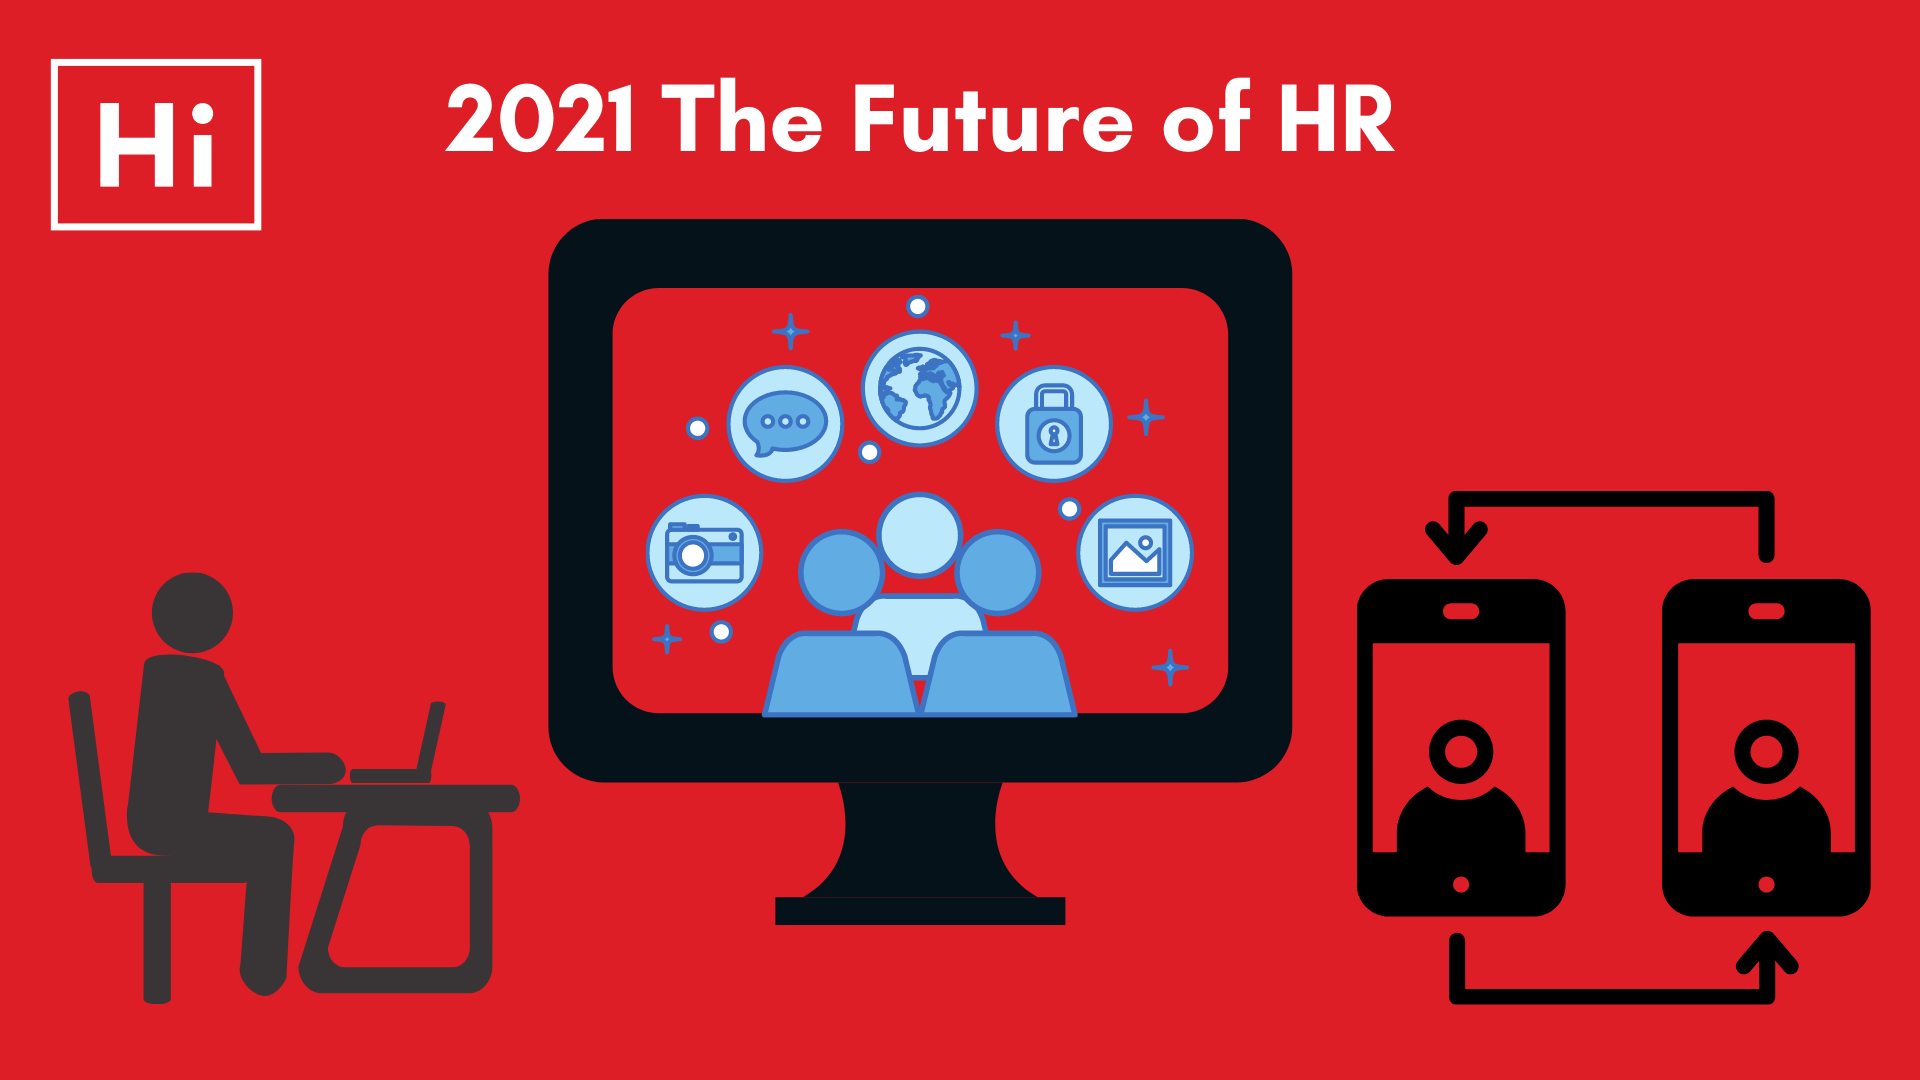 2021: The Future of HR